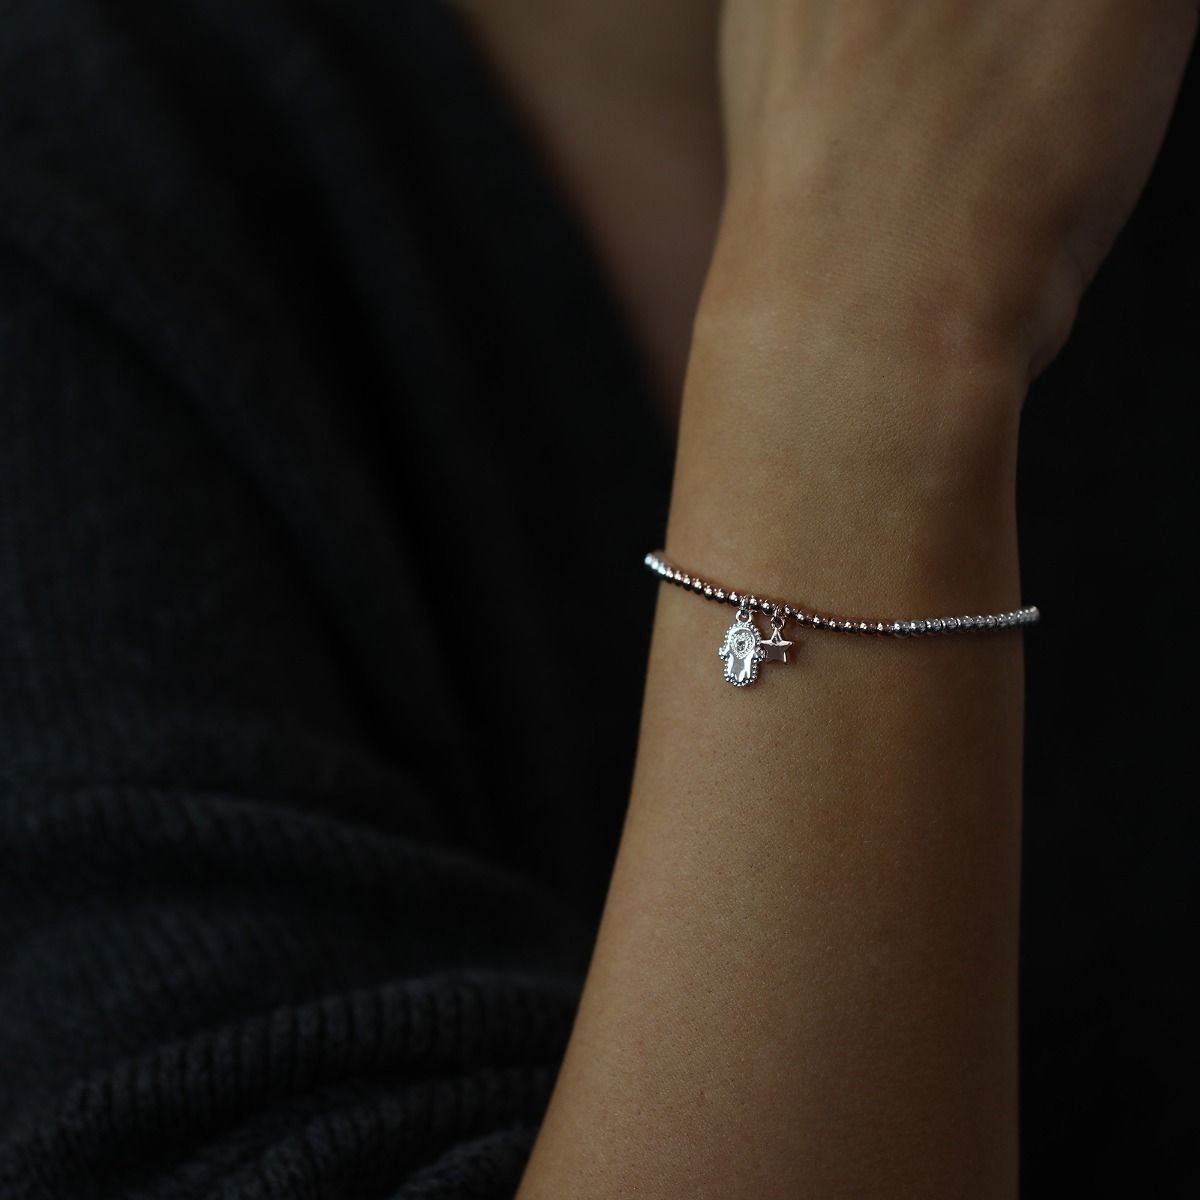 Embrace the essence of friendship with this beaded bracelet adorned with a hamsa hand and star charm. Handcrafted with care, it combines spirituality and celestial beauty. The hamsa hand symbolizes protection, while the star represents guidance. A meaning